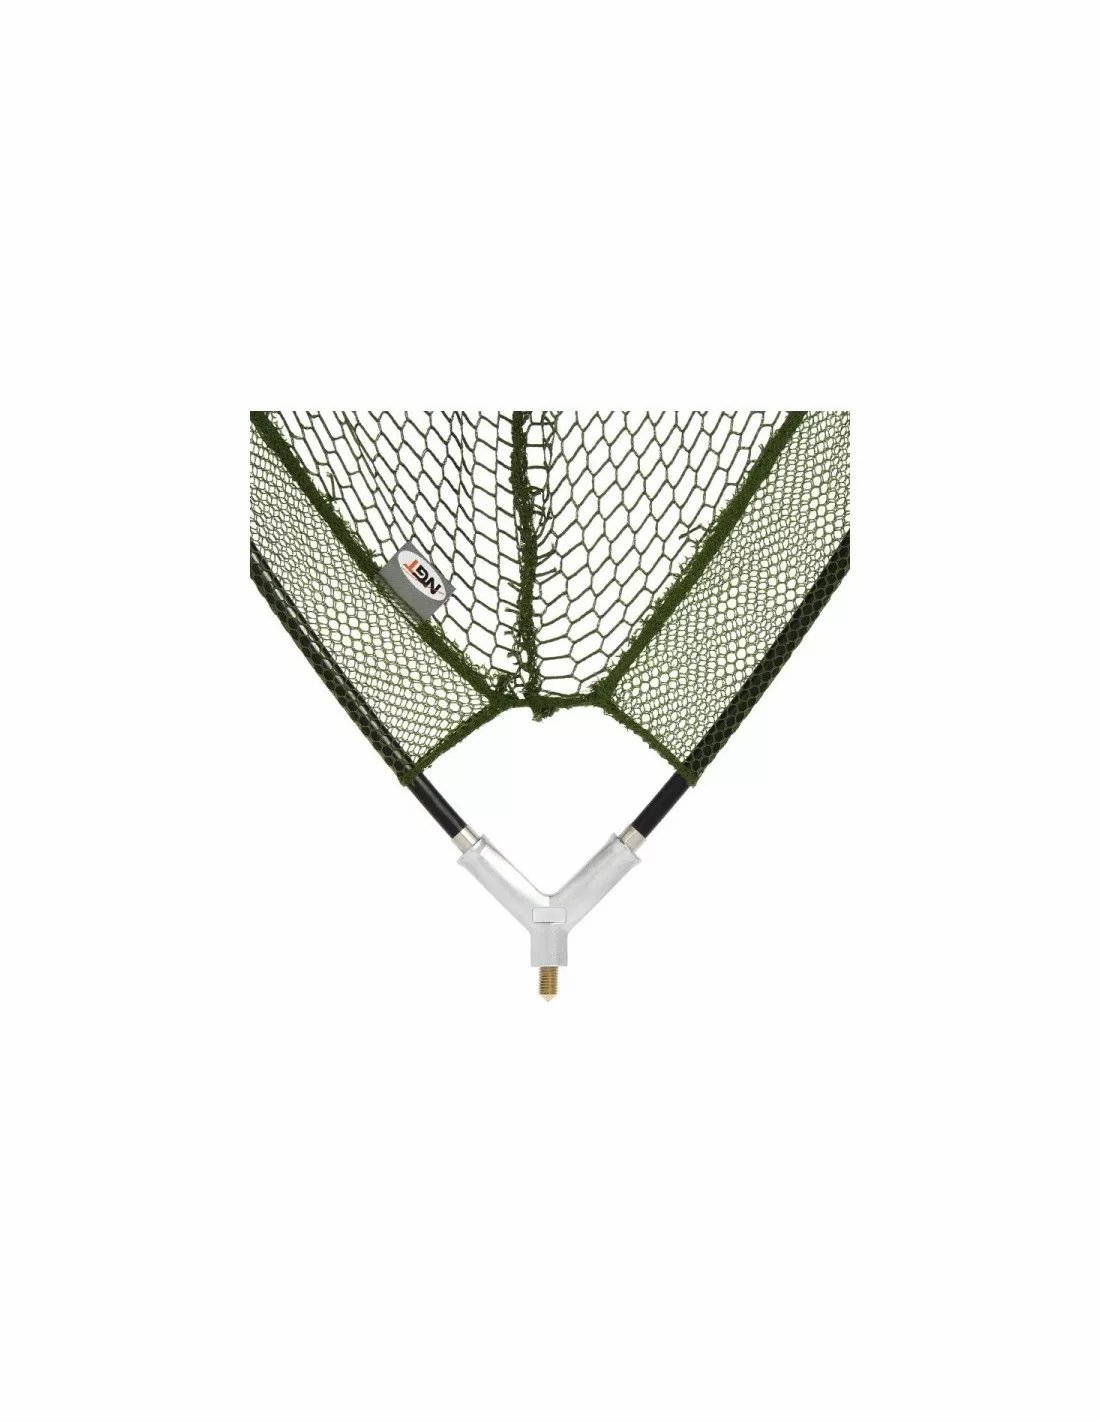 NGT 50" Green Specimen Net with Dual Net Float System (Metal Block) плуваща глава за кеп